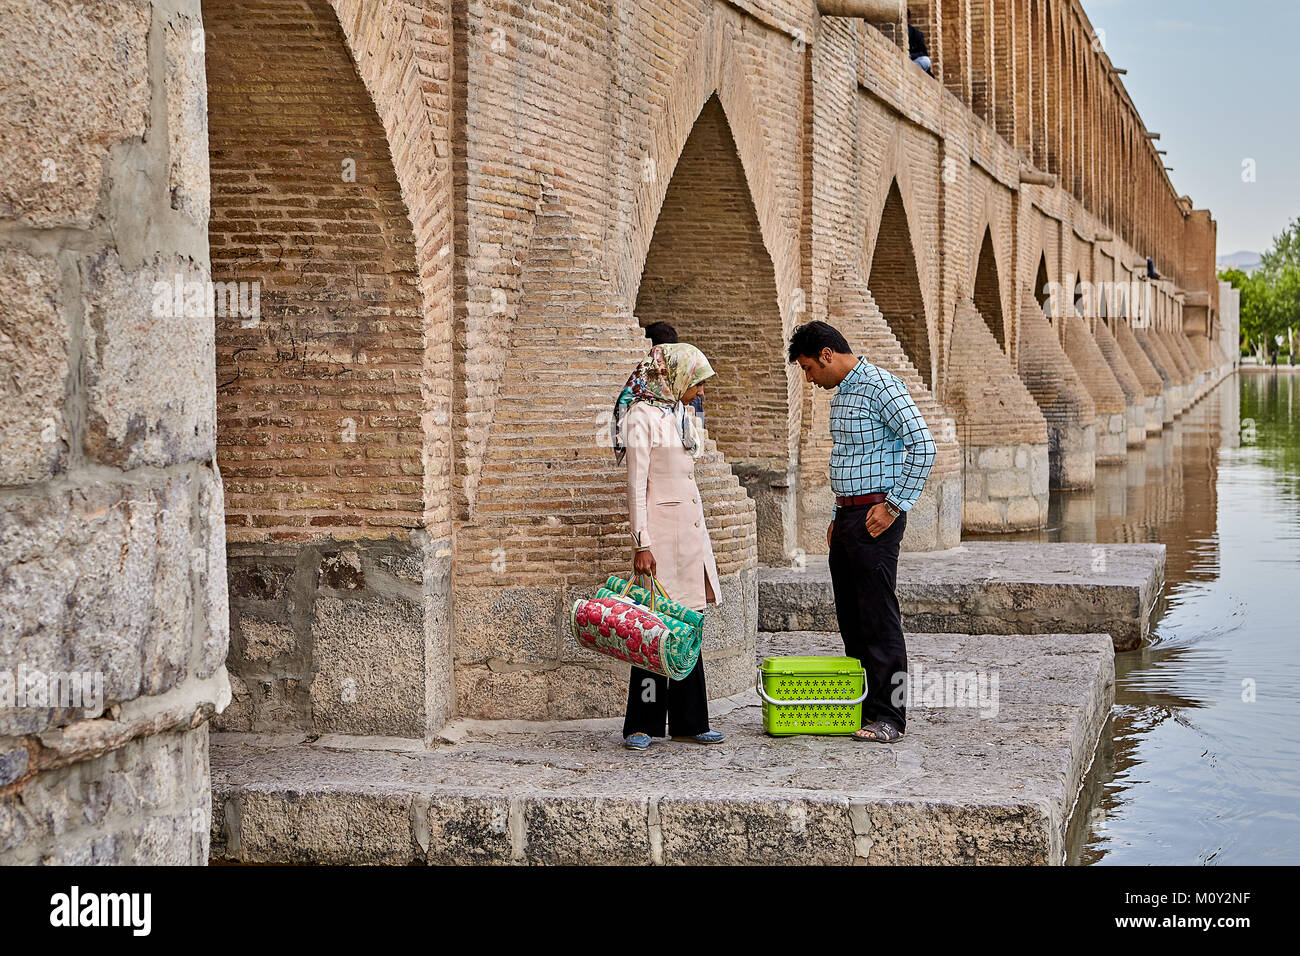 Isfahan, Iran - April 24, 2017: A man and a girl came to the bridge of Allahverdi Khan to have a picnic near the river Zayandeh. Stock Photo